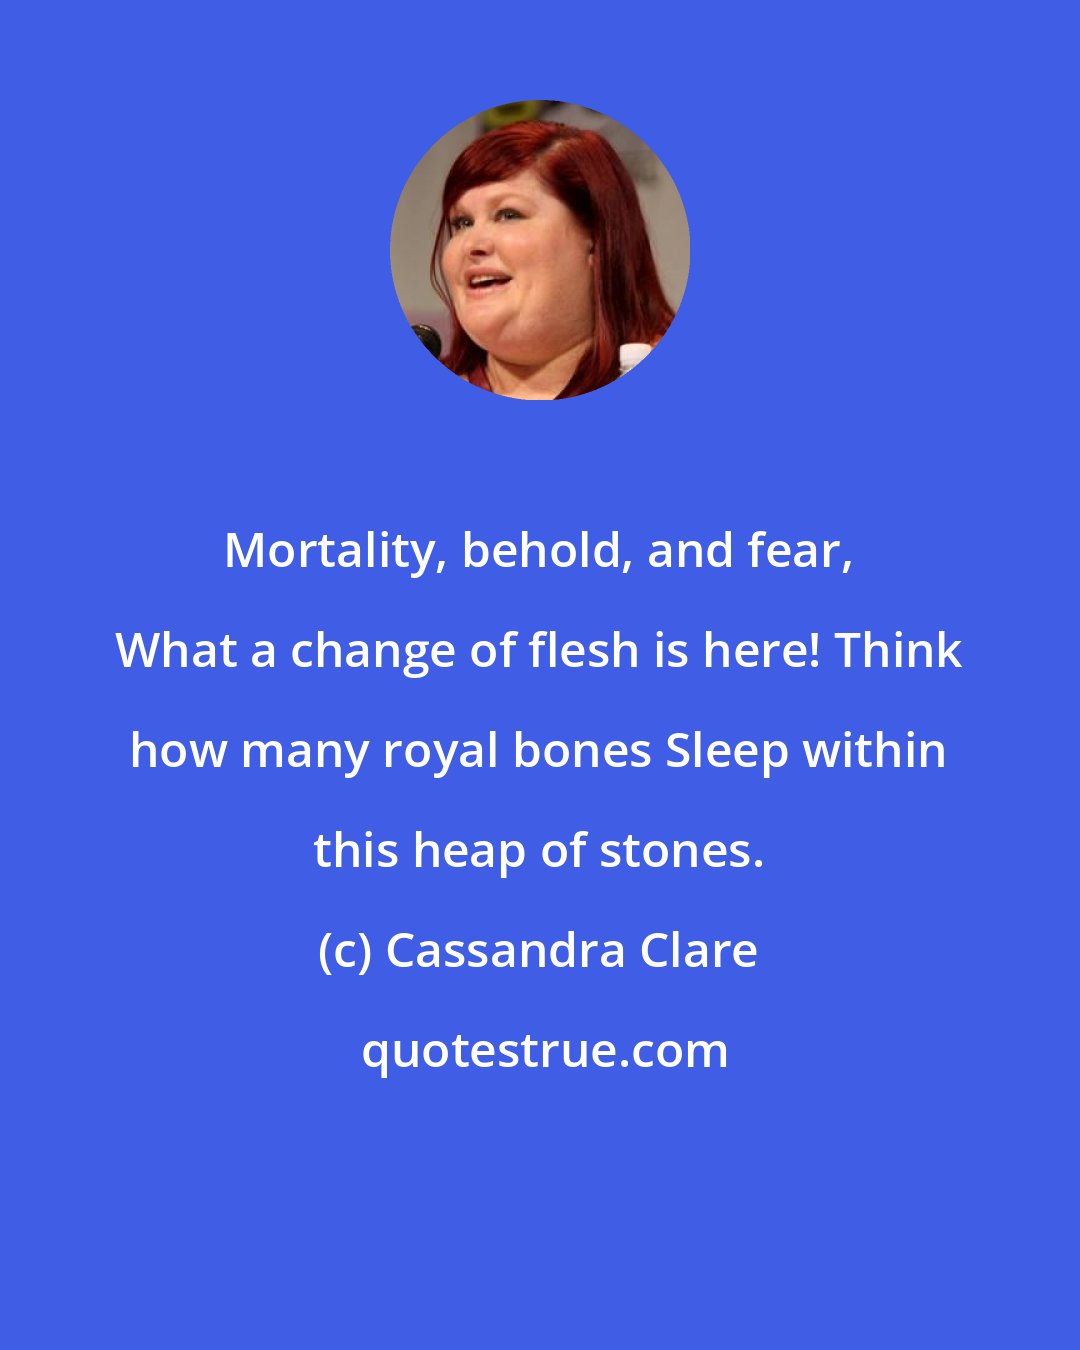 Cassandra Clare: Mortality, behold, and fear, What a change of flesh is here! Think how many royal bones Sleep within this heap of stones.